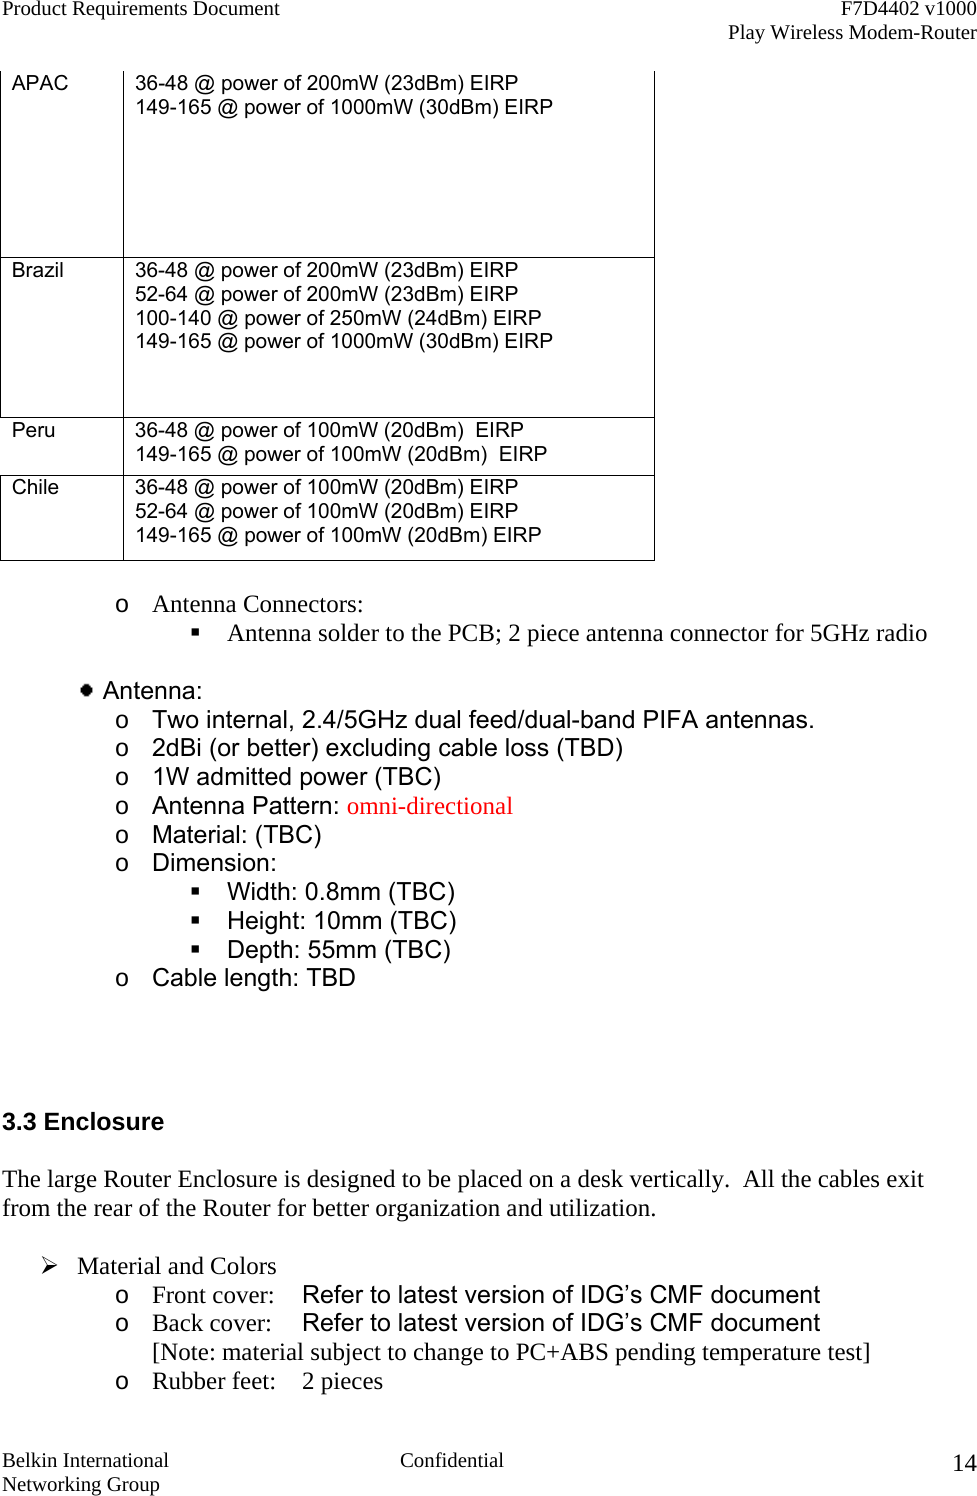 Product Requirements Document    F7D4402 v1000     Play Wireless Modem-Router  Belkin International  Confidential Networking Group 14APAC  36-48 @ power of 200mW (23dBm) EIRP 149-165 @ power of 1000mW (30dBm) EIRP Brazil  36-48 @ power of 200mW (23dBm) EIRP 52-64 @ power of 200mW (23dBm) EIRP 100-140 @ power of 250mW (24dBm) EIRP  149-165 @ power of 1000mW (30dBm) EIRP Peru  36-48 @ power of 100mW (20dBm)  EIRP        149-165 @ power of 100mW (20dBm)  EIRP Chile  36-48 @ power of 100mW (20dBm) EIRP 52-64 @ power of 100mW (20dBm) EIRP 149-165 @ power of 100mW (20dBm) EIRP  o  Antenna Connectors:  Antenna solder to the PCB; 2 piece antenna connector for 5GHz radio   Antenna:     o  Two internal, 2.4/5GHz dual feed/dual-band PIFA antennas. o  2dBi (or better) excluding cable loss (TBD) o  1W admitted power (TBC) o  Antenna Pattern: omni-directional o  Material: (TBC) o  Dimension:   Width: 0.8mm (TBC)  Height: 10mm (TBC)  Depth: 55mm (TBC) o  Cable length: TBD     3.3 Enclosure  The large Router Enclosure is designed to be placed on a desk vertically.  All the cables exit from the rear of the Router for better organization and utilization.     Material and Colors  o  Front cover:  Refer to latest version of IDG’s CMF document o  Back cover:  Refer to latest version of IDG’s CMF document [Note: material subject to change to PC+ABS pending temperature test] o  Rubber feet:   2 pieces 